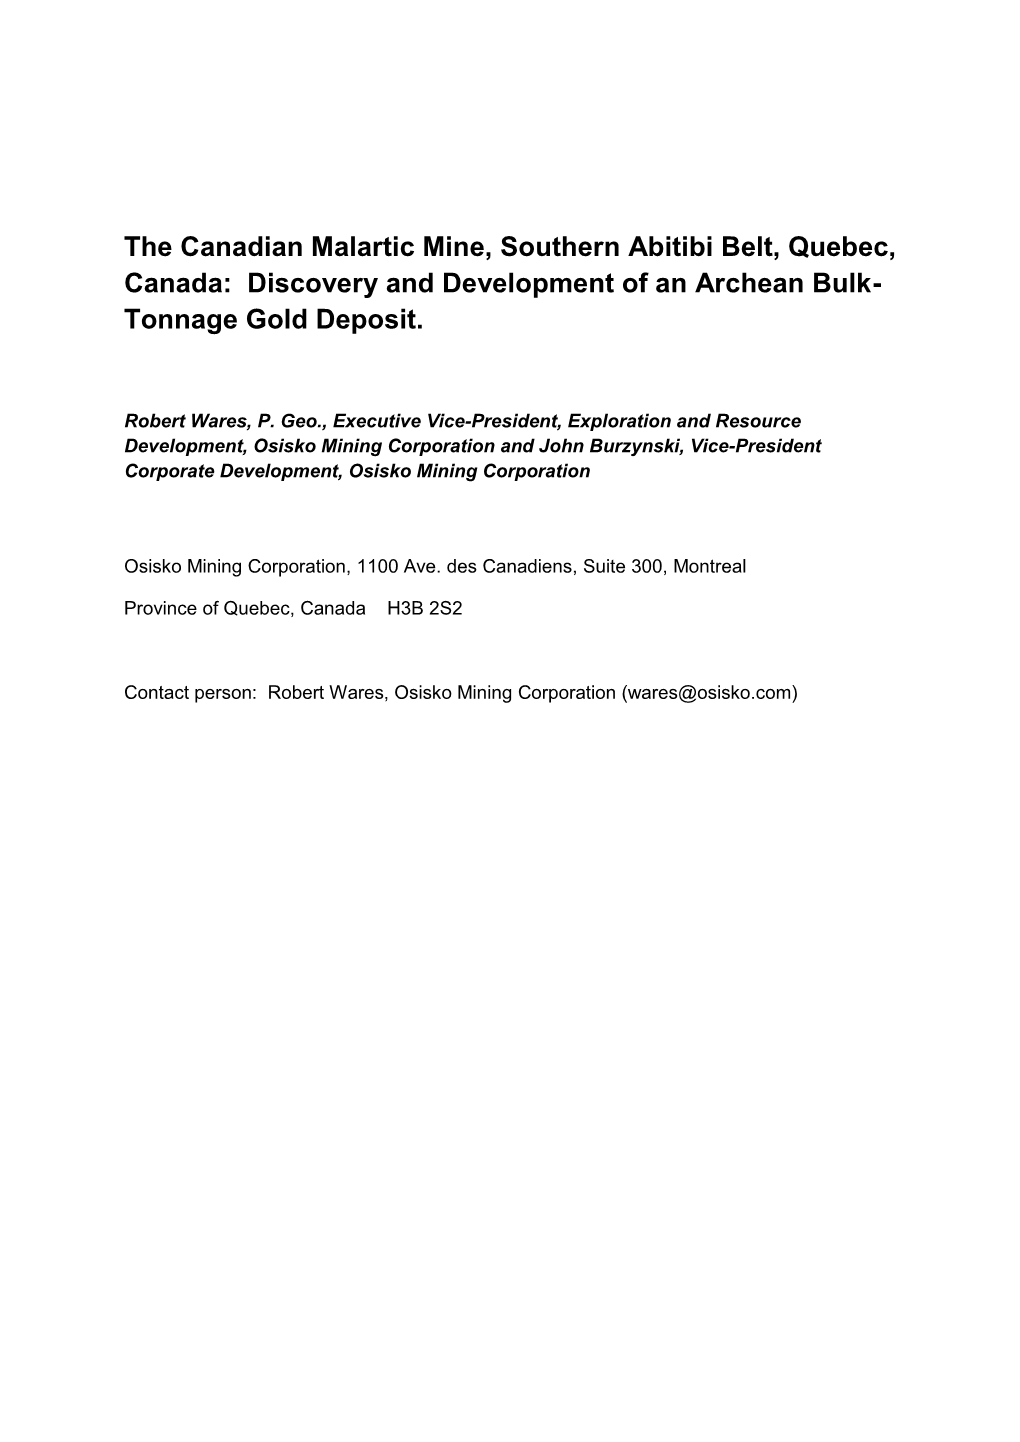 The Canadian Malartic Mine, Southern Abitibi Belt, Quebec, Canada: Discovery and Development of an Archean Bulk- Tonnage Gold Deposit